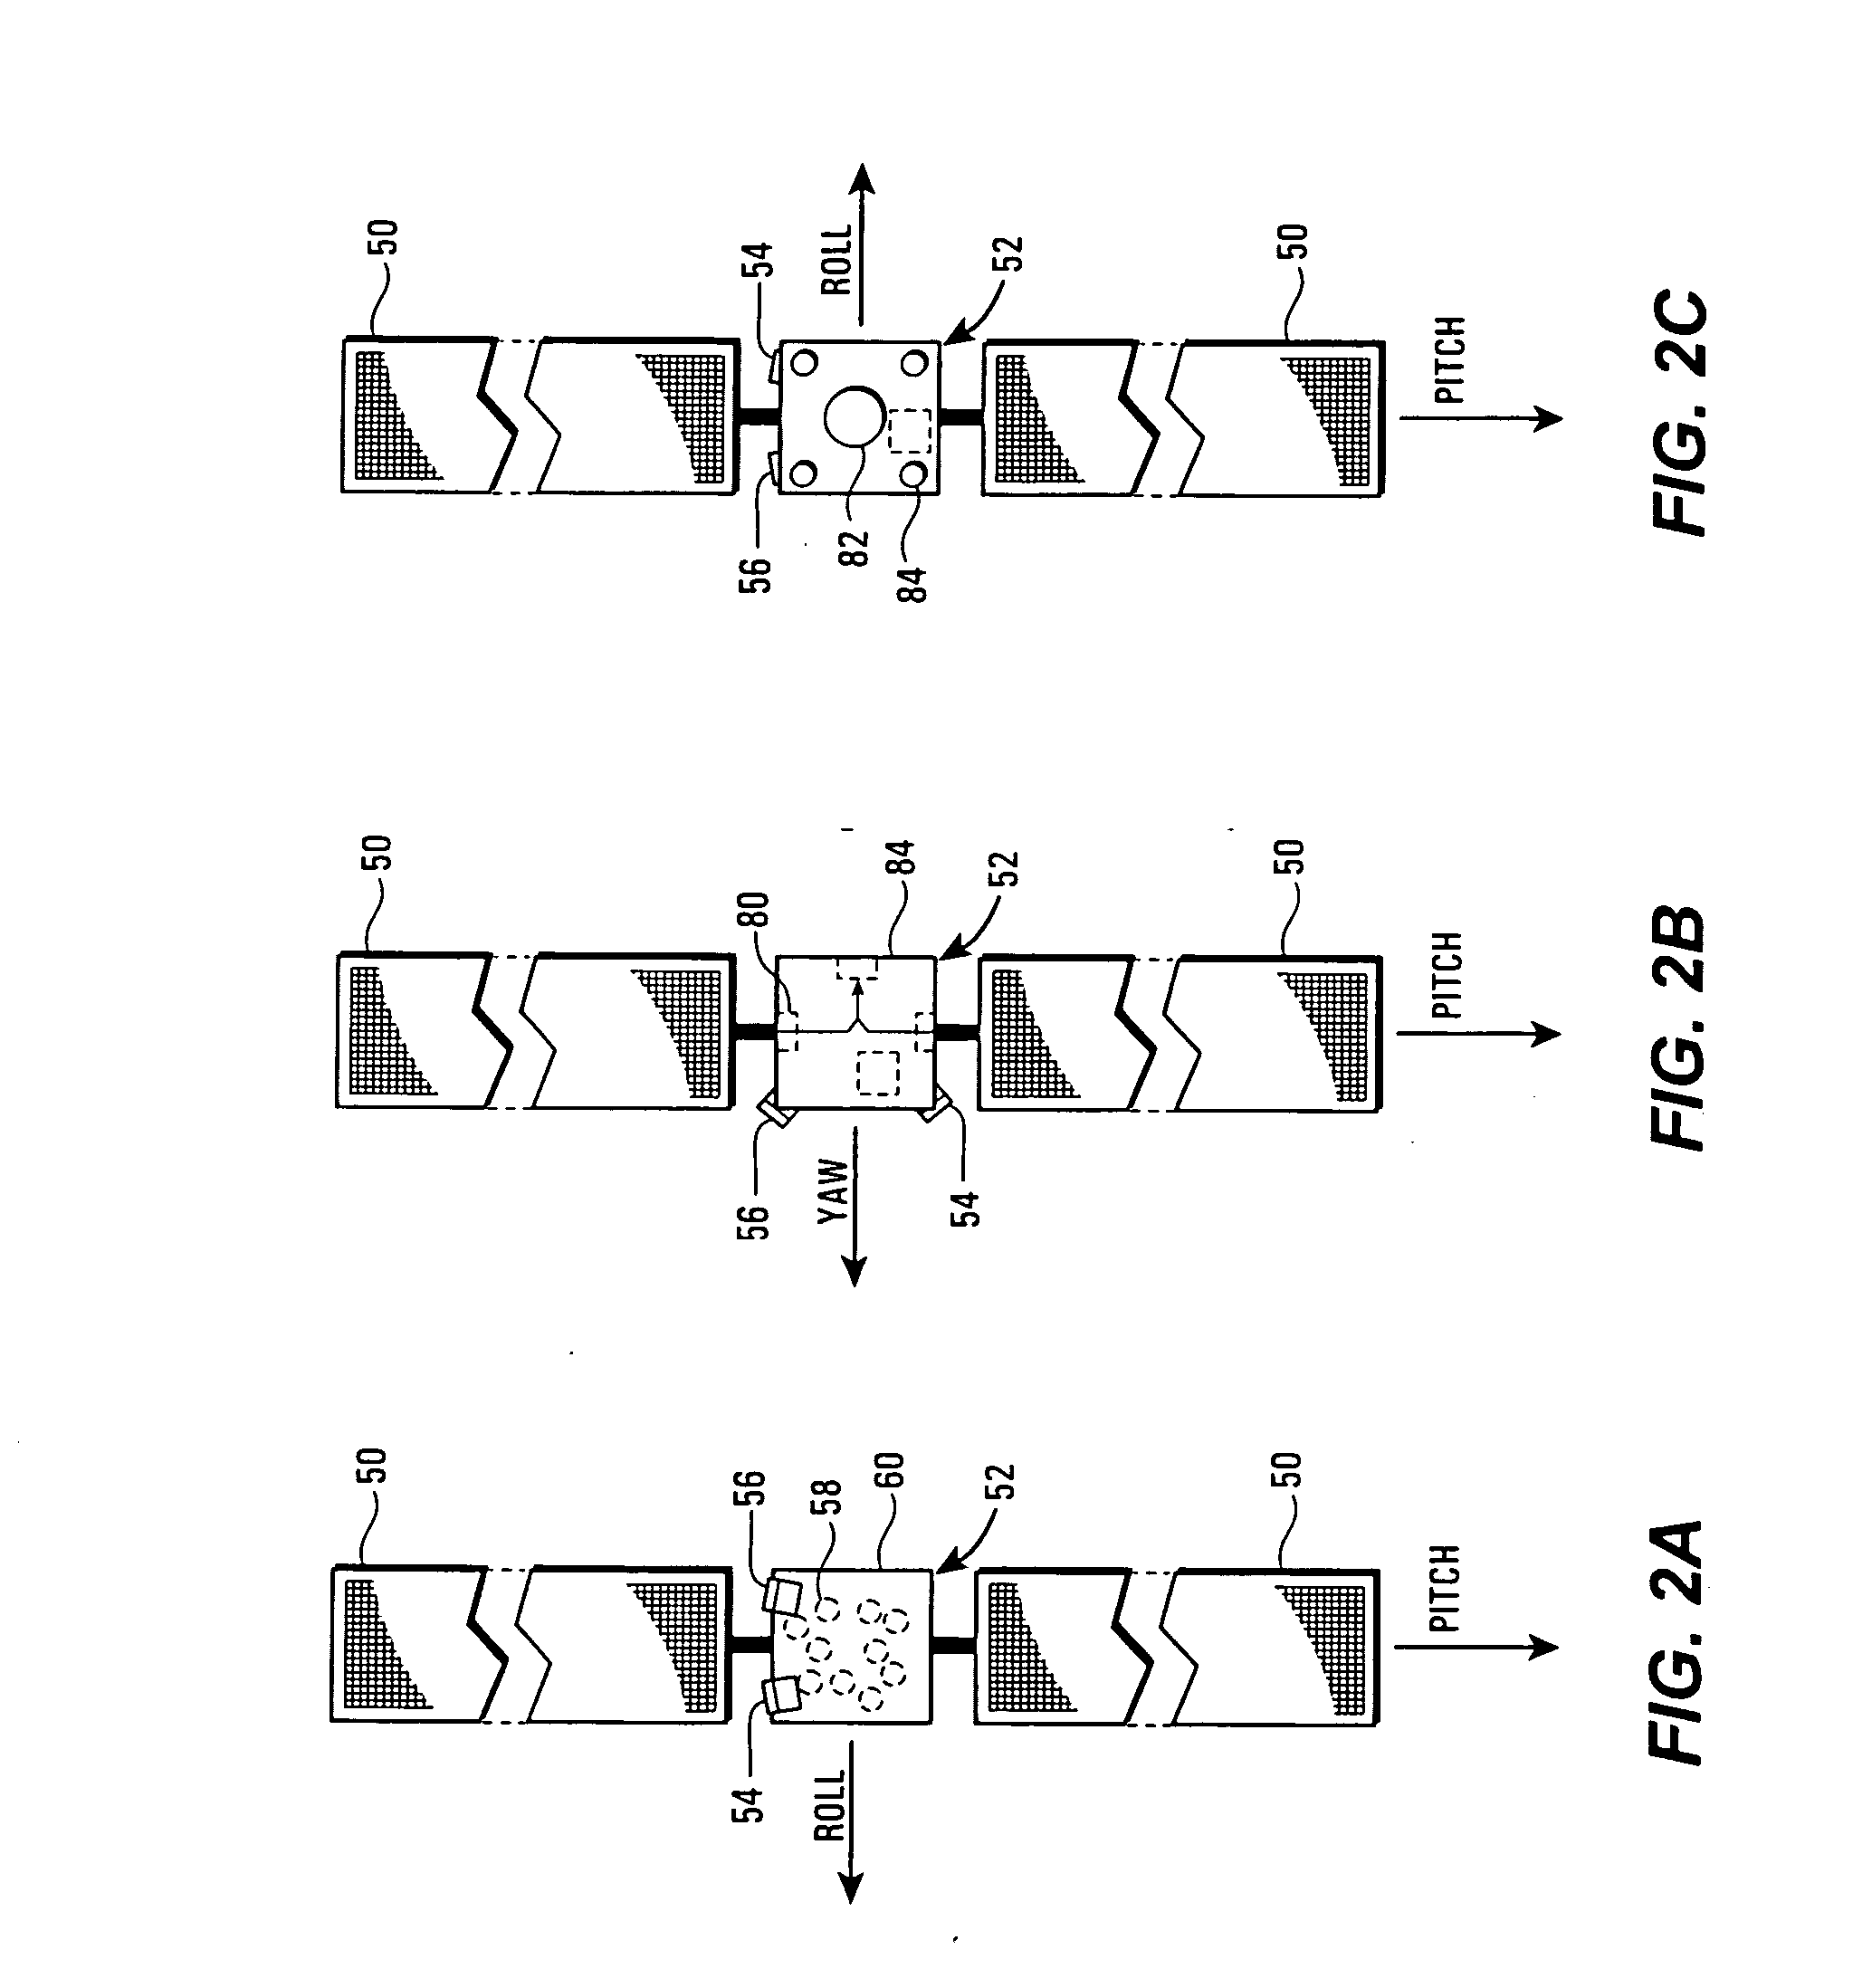 Spacecraft power acquisition method for wing-stowed configuration